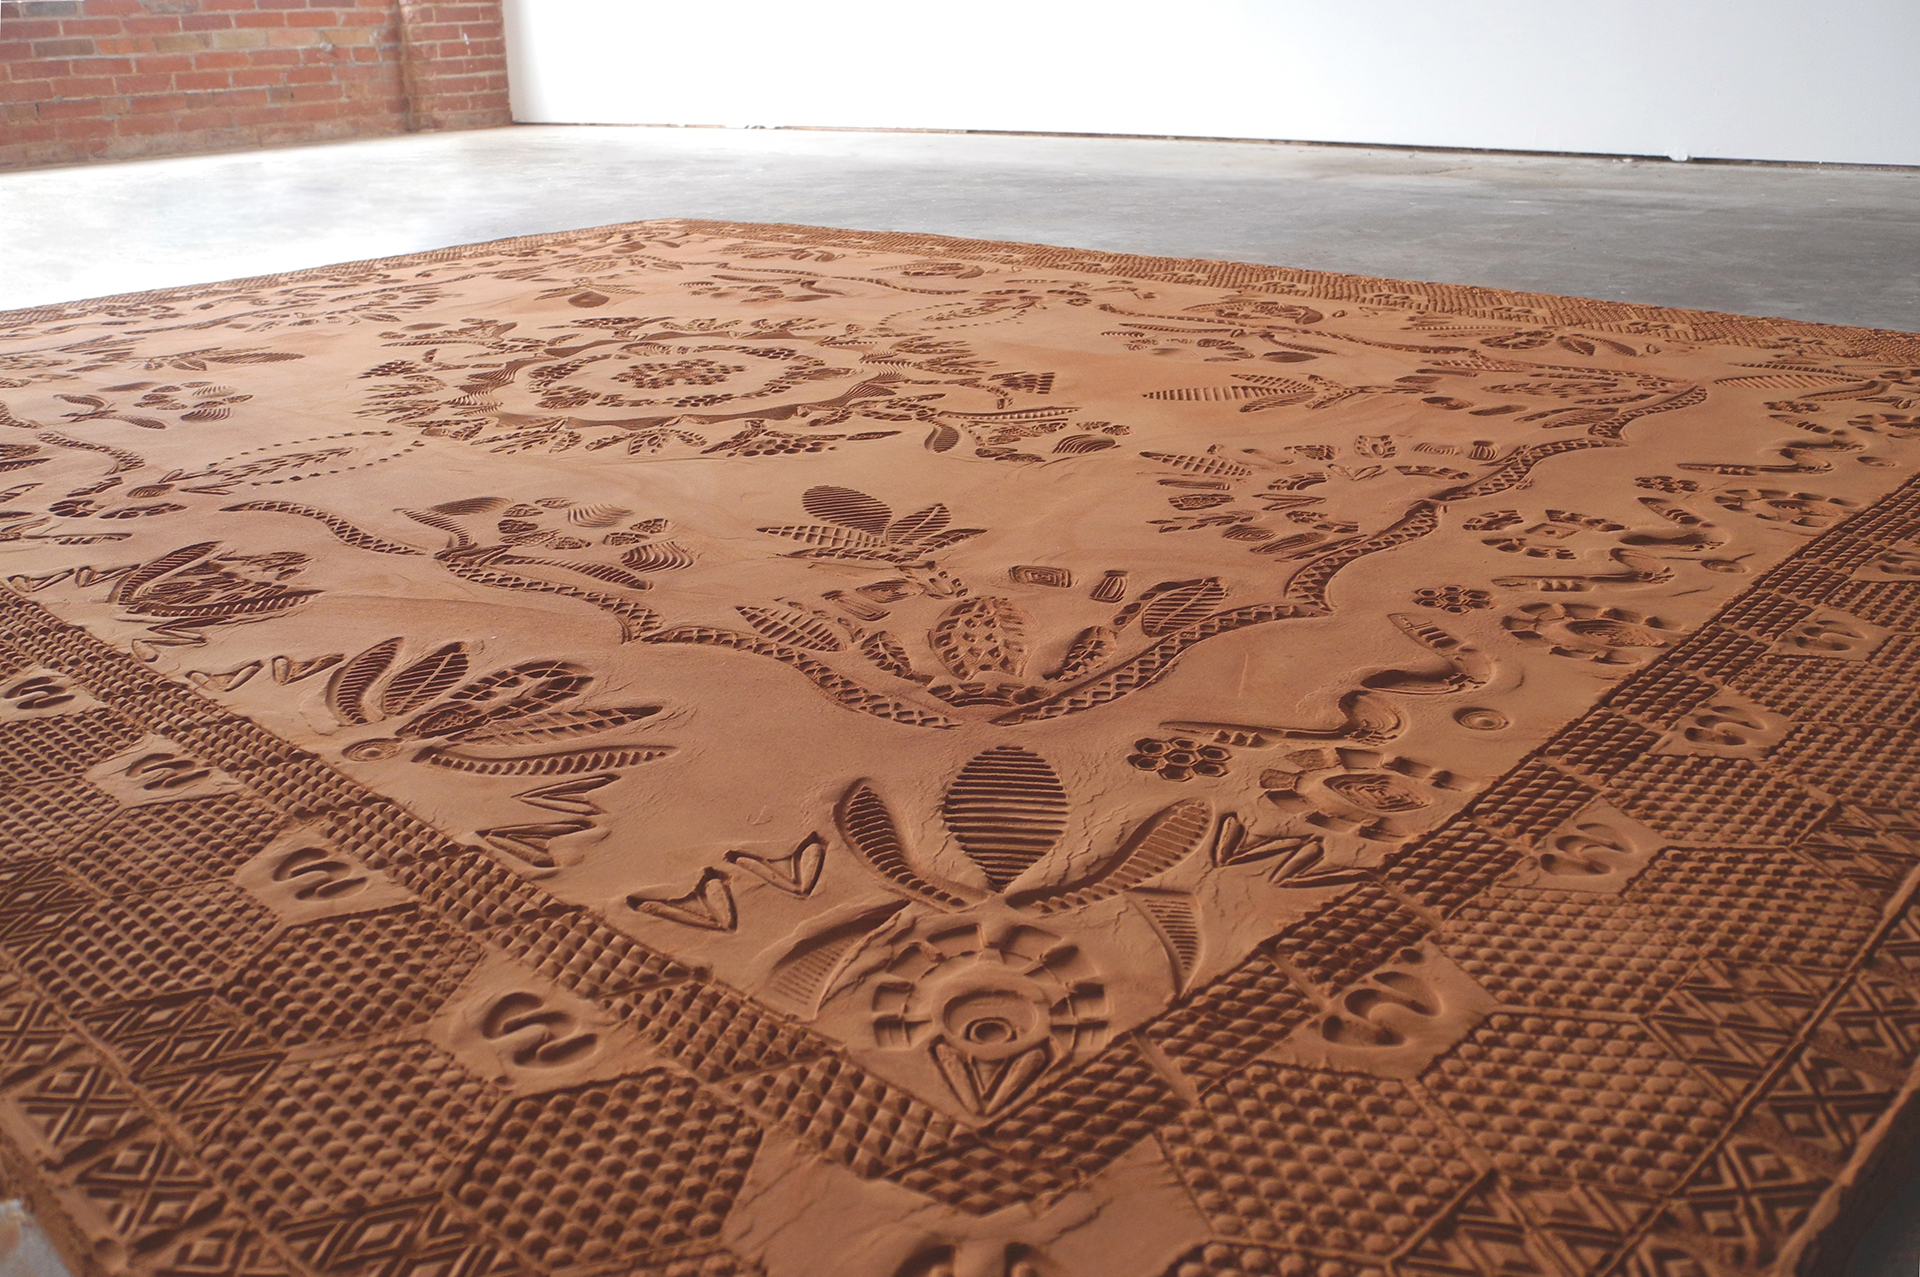 Detail of a low relief sculpture mimicking an intricate patterned rug, made with modified shoe soles imprinting ground & sifted Oklahoma red dirt